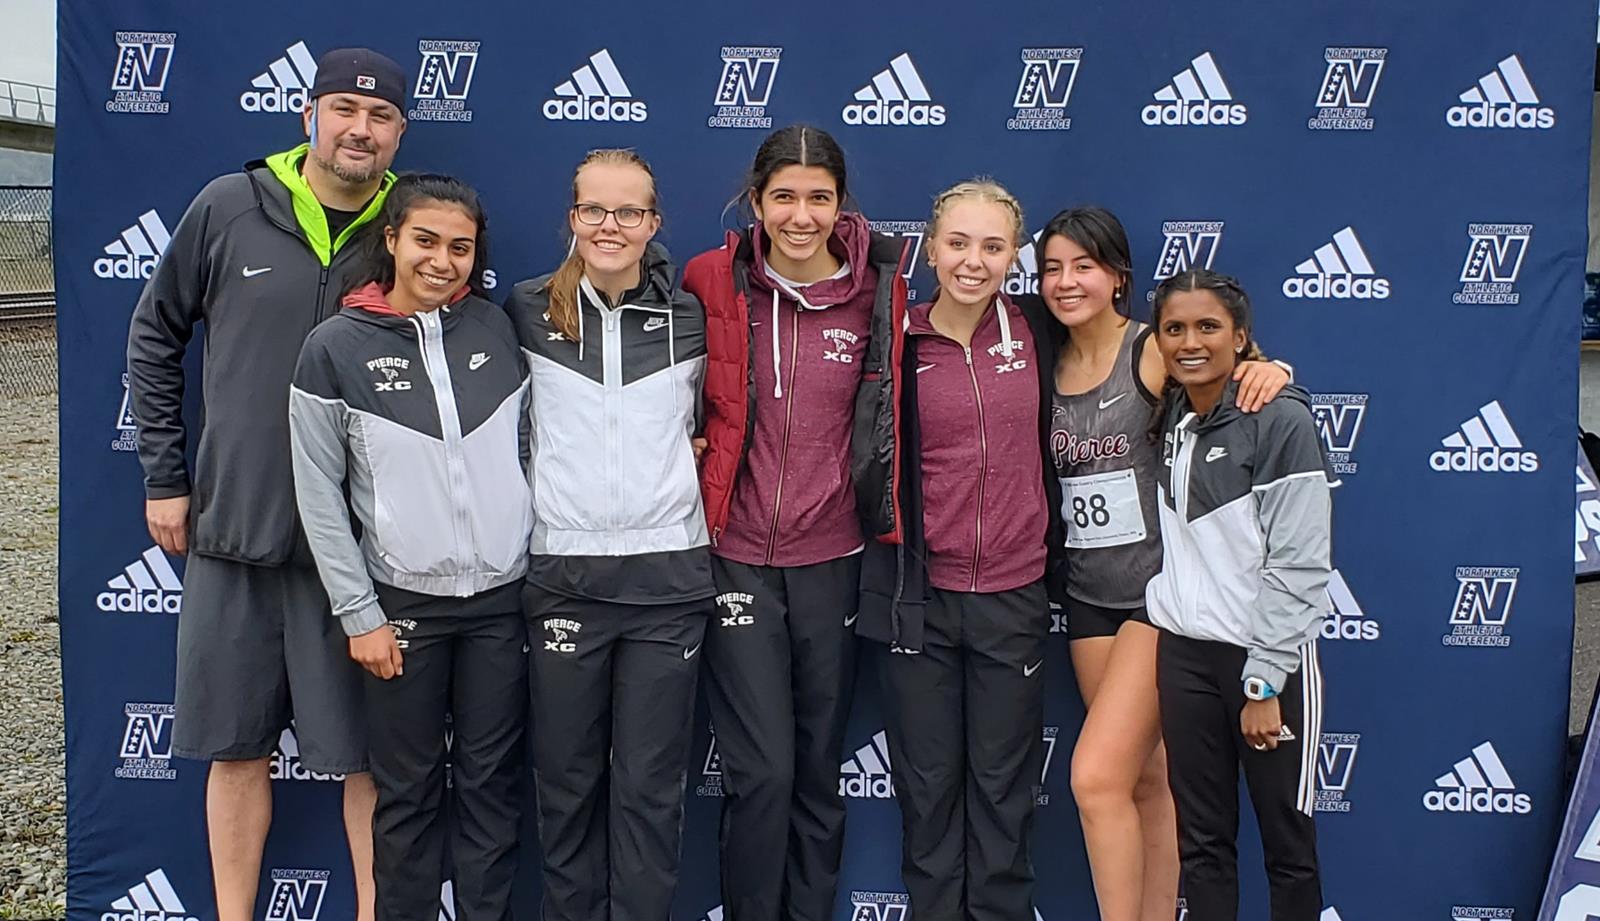 Raiders capture 4th Place at NWAC Championships - Jasmine Davis places 4th